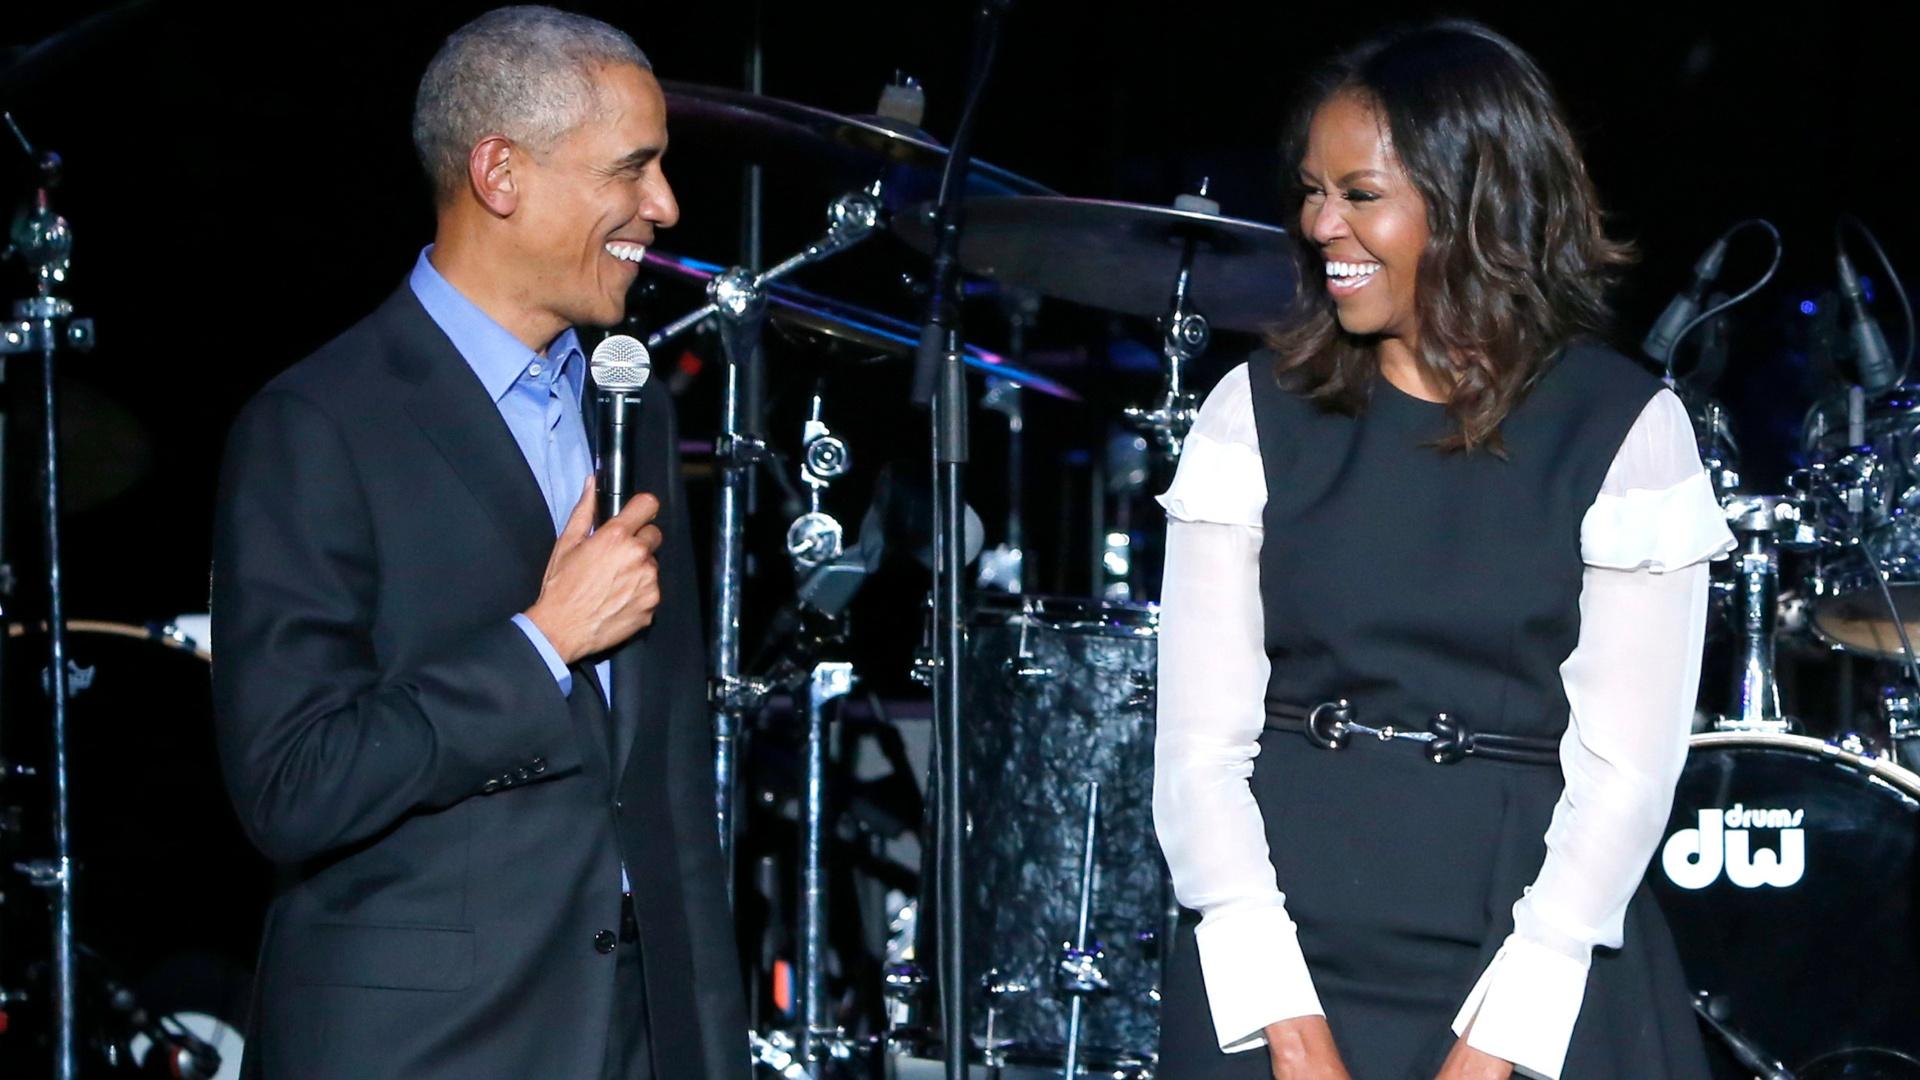 Former President Barack Obama, left, and former first lady Michelle Obama appear on stage during a community concert at the Obama Foundation Summit on Nov. 1, 2017, in Chicago. (AP Photo / Charles Rex Arbogast, file)